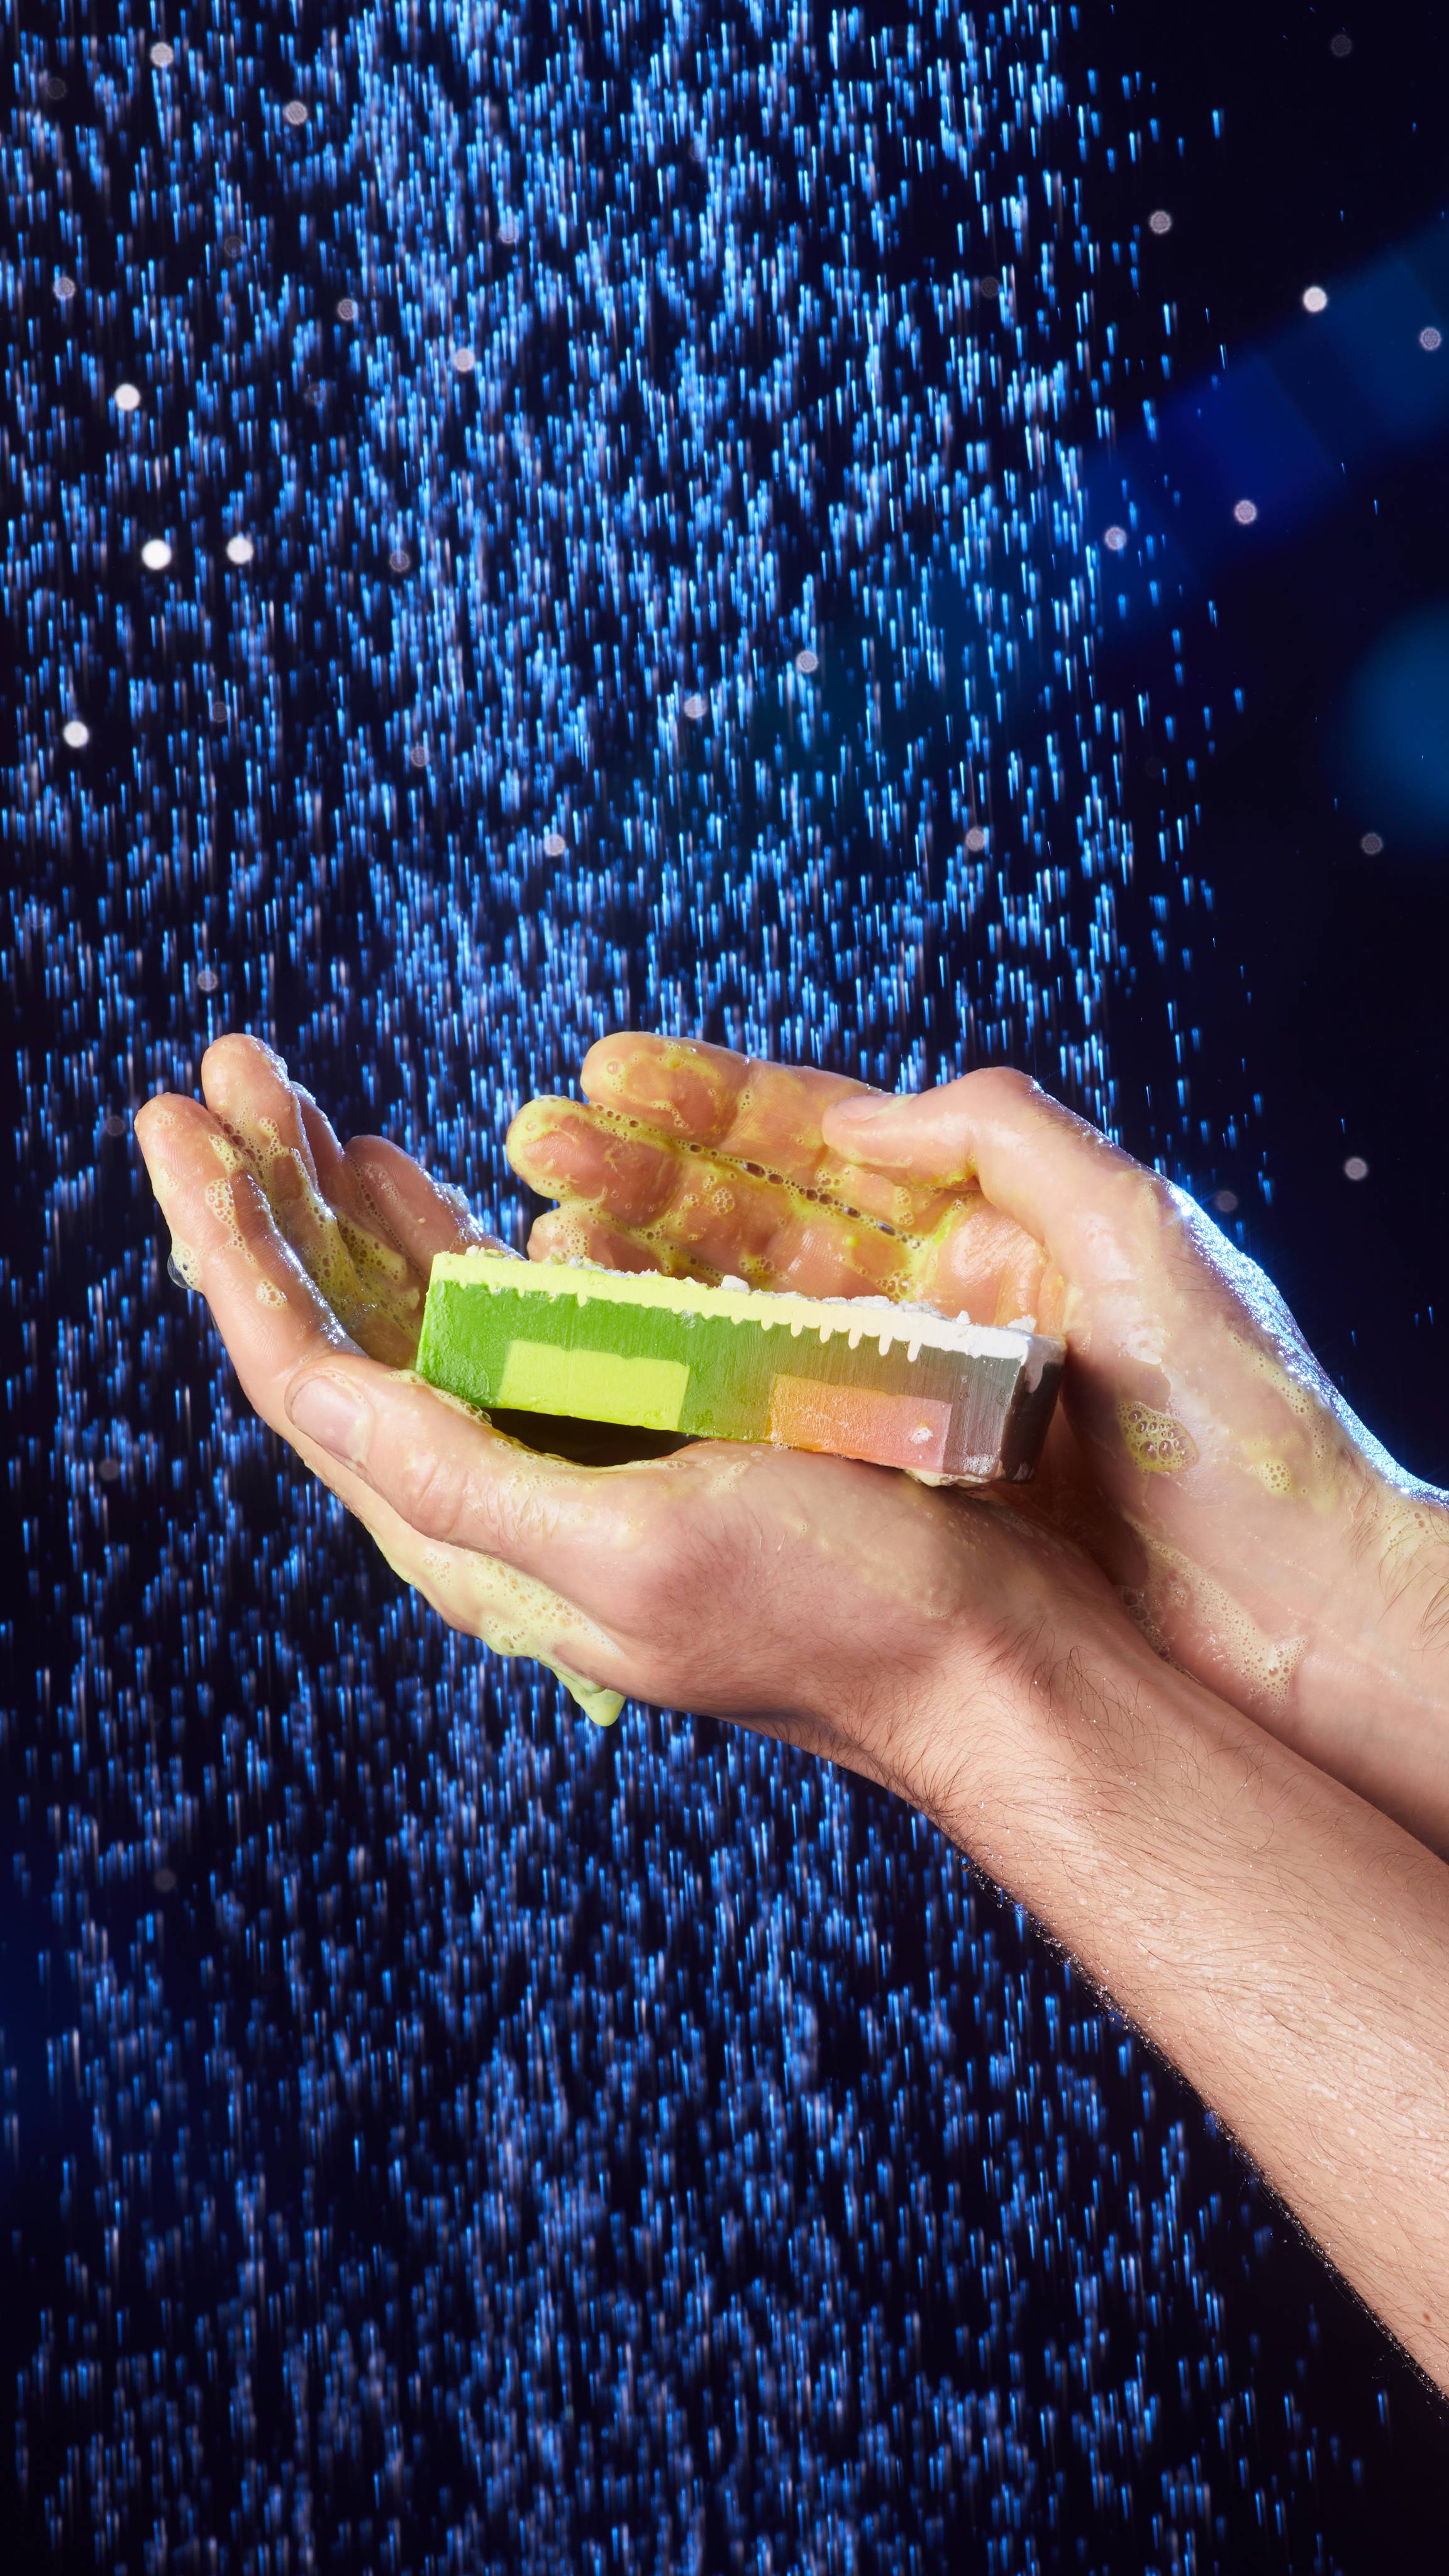 A close-up of the model's hands under shower water holding the Baked Alaska soap with thick, green lather.